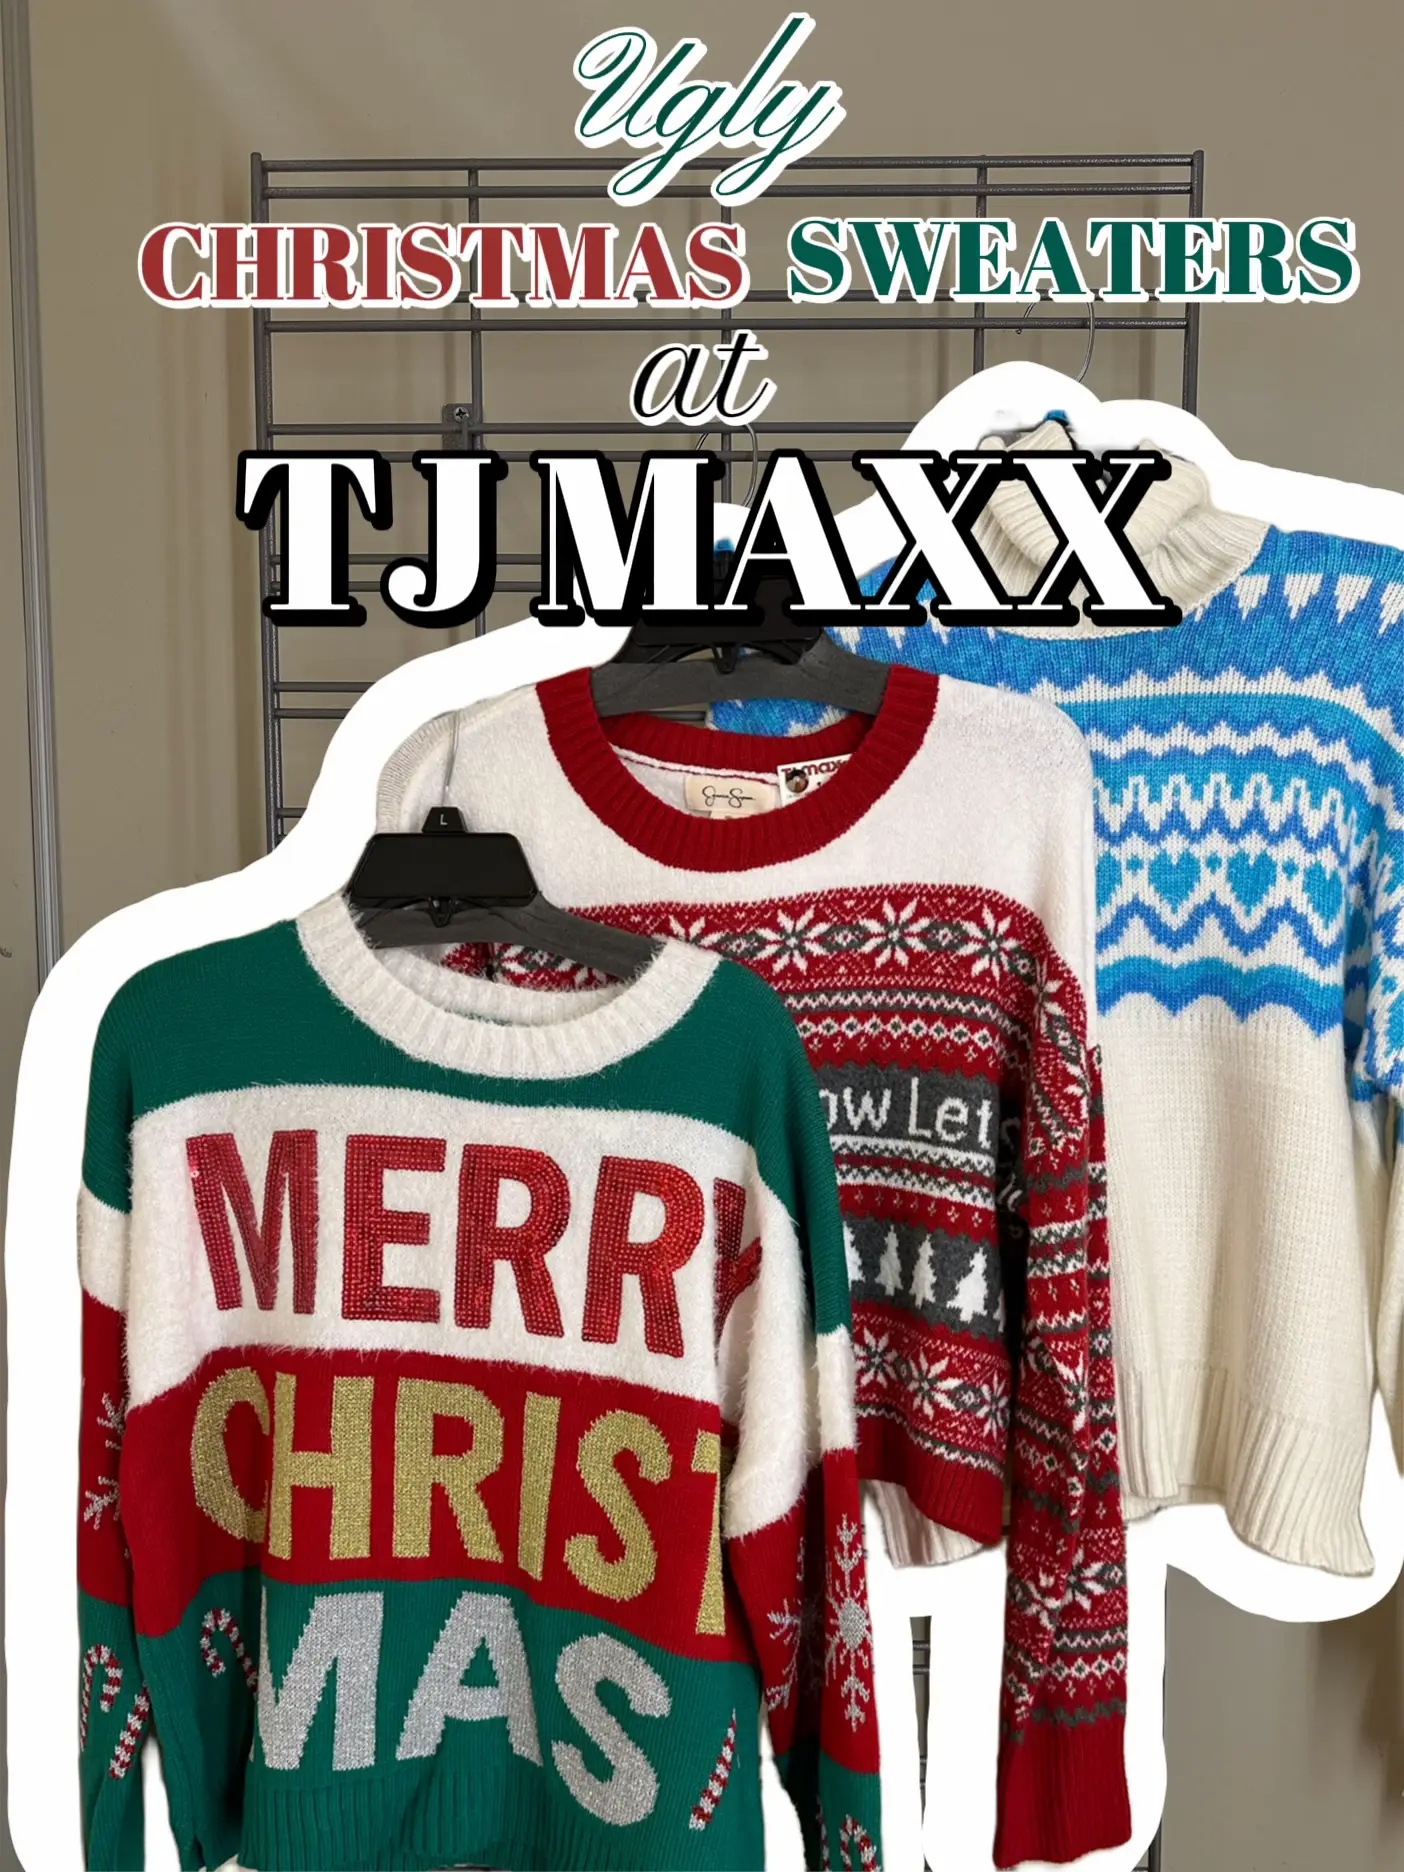  A collection of Christmas sweaters at TJ Maxx.